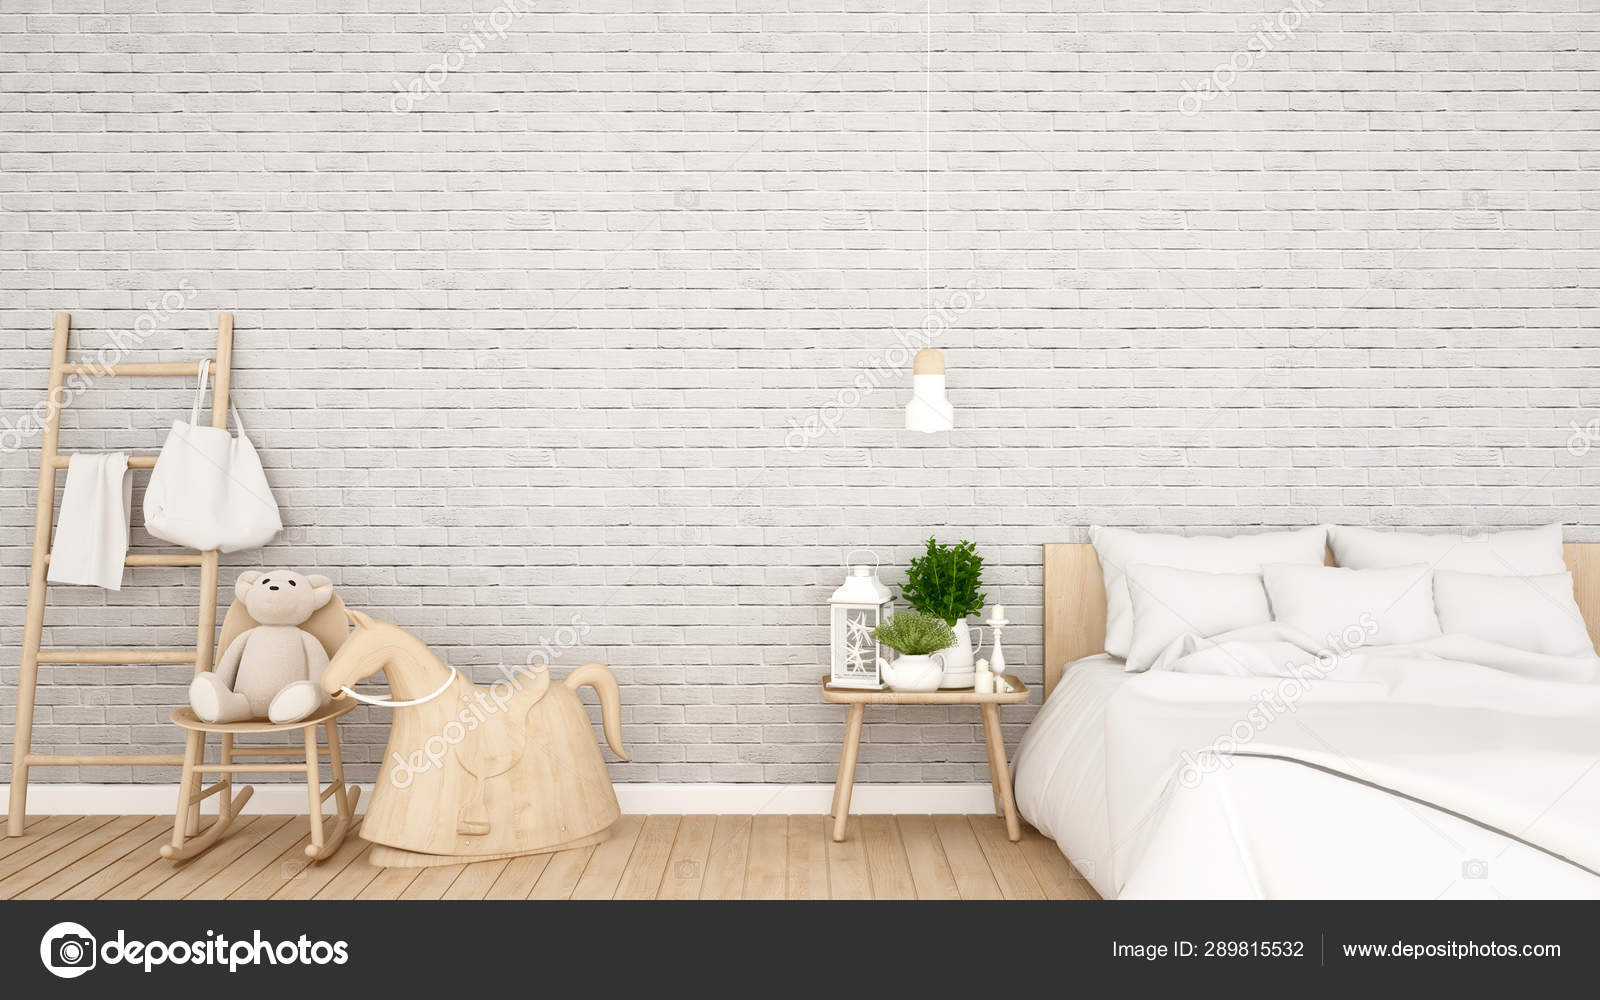 Bedroom And White Brick Wall Decorate In Home Or Apartment Bedroom Design For Artwork Kid Room 3d Rendering Stock Photo Image By C Pantowto Gmail Com